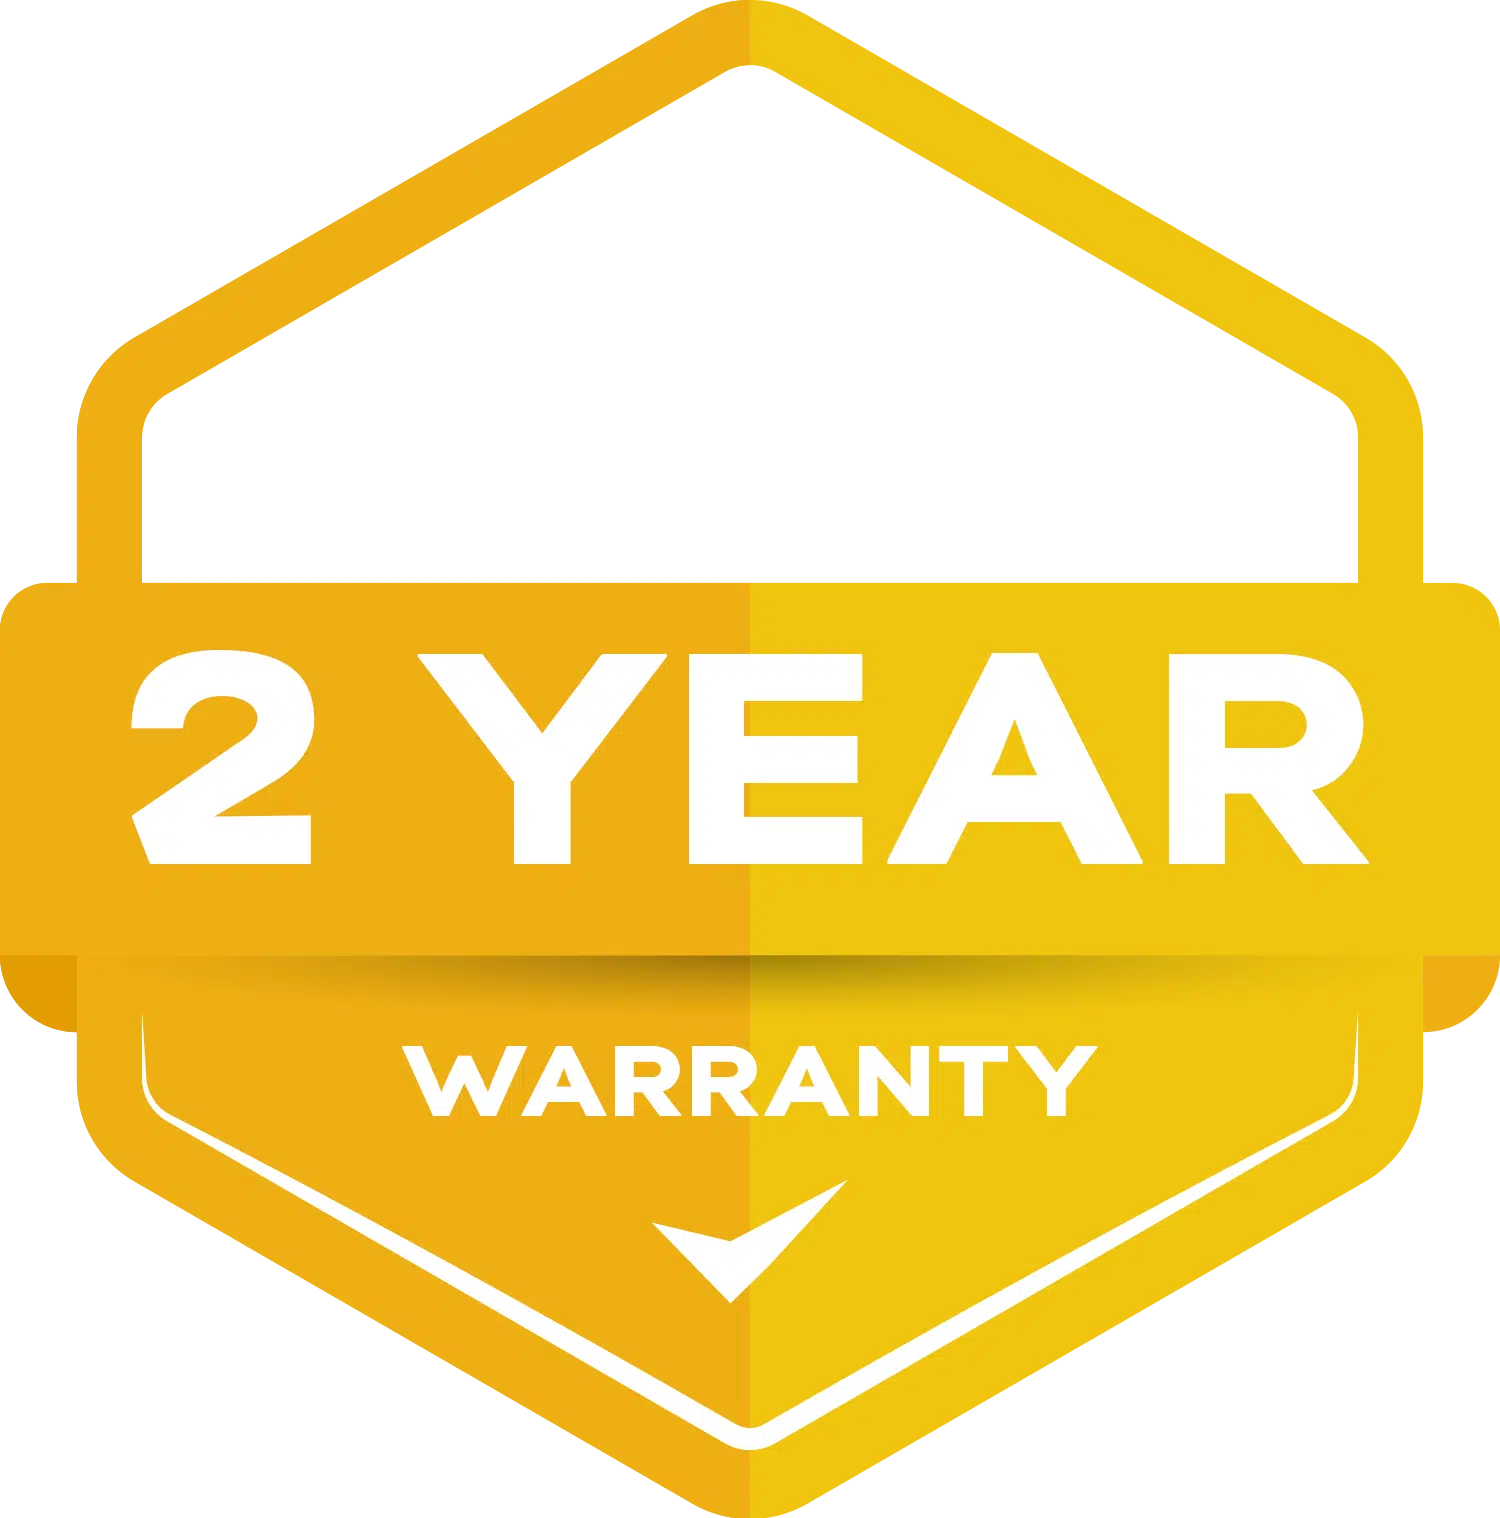 Extended Warranty 2 Year – P3000